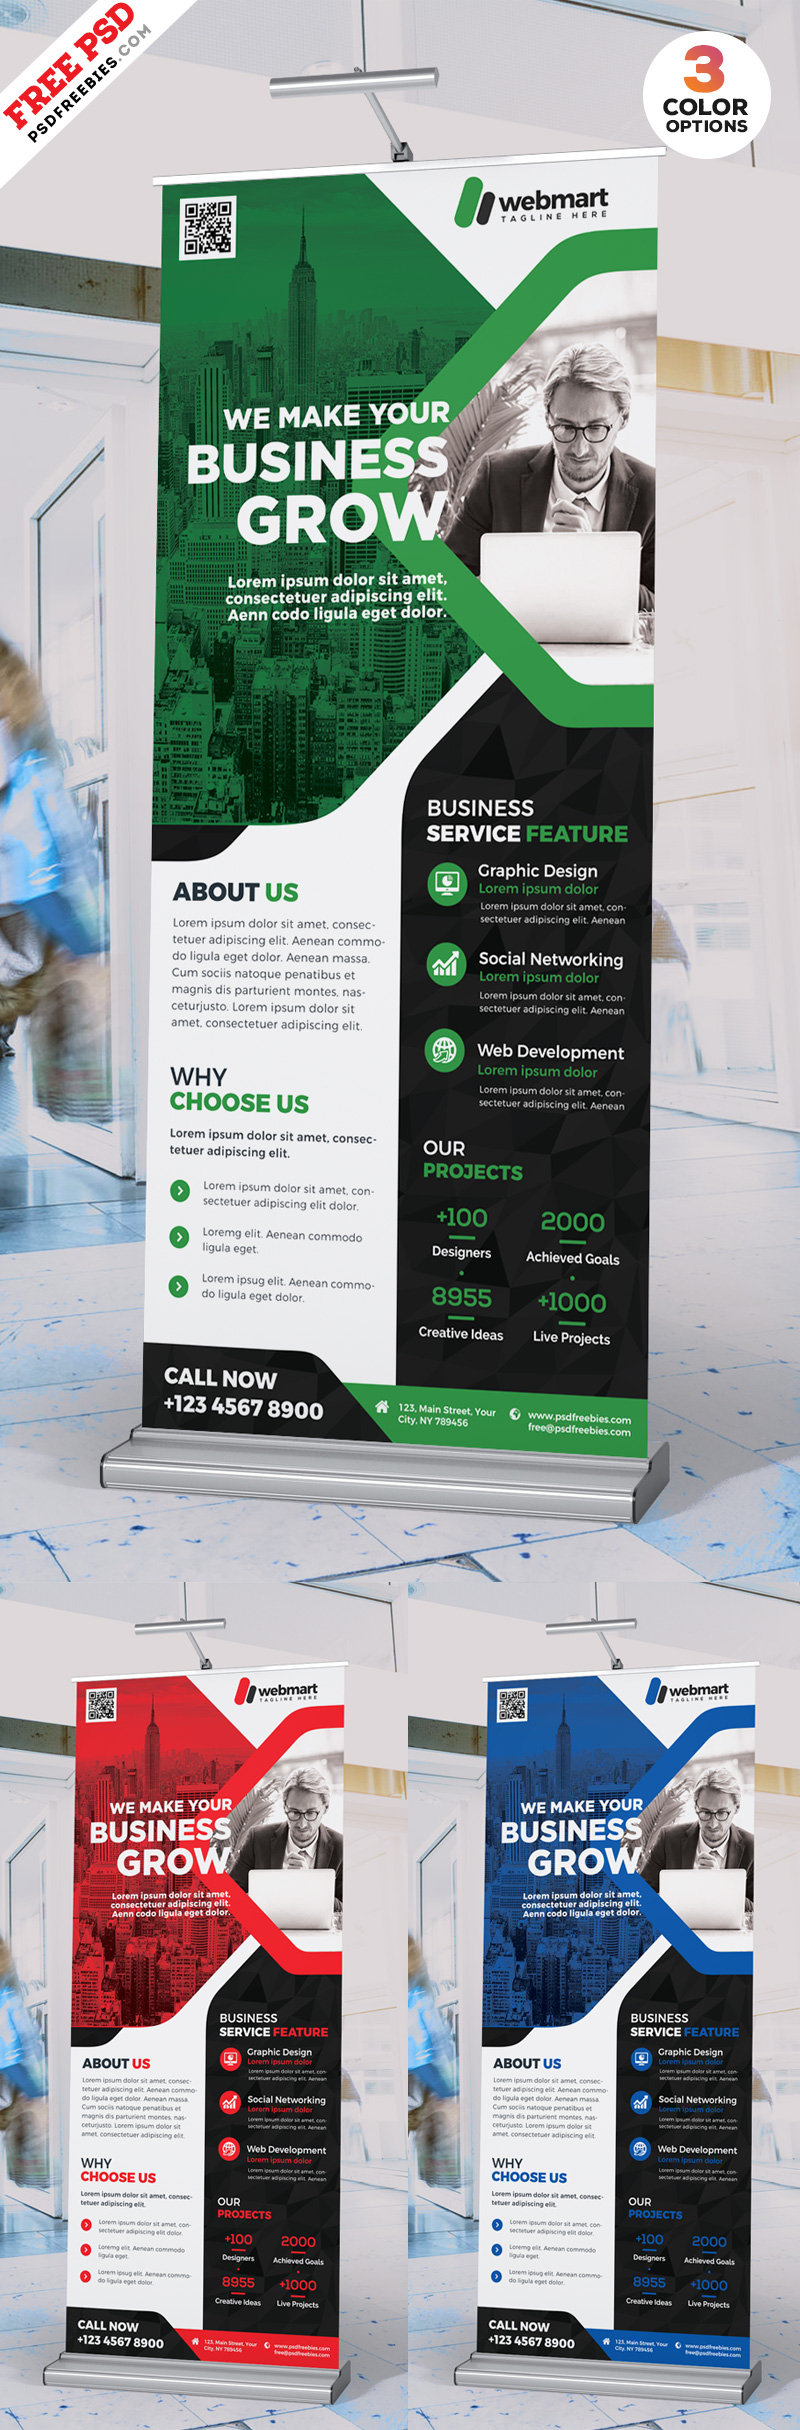 Corporate Roll-up Banner Design Bundle PSD Free Download